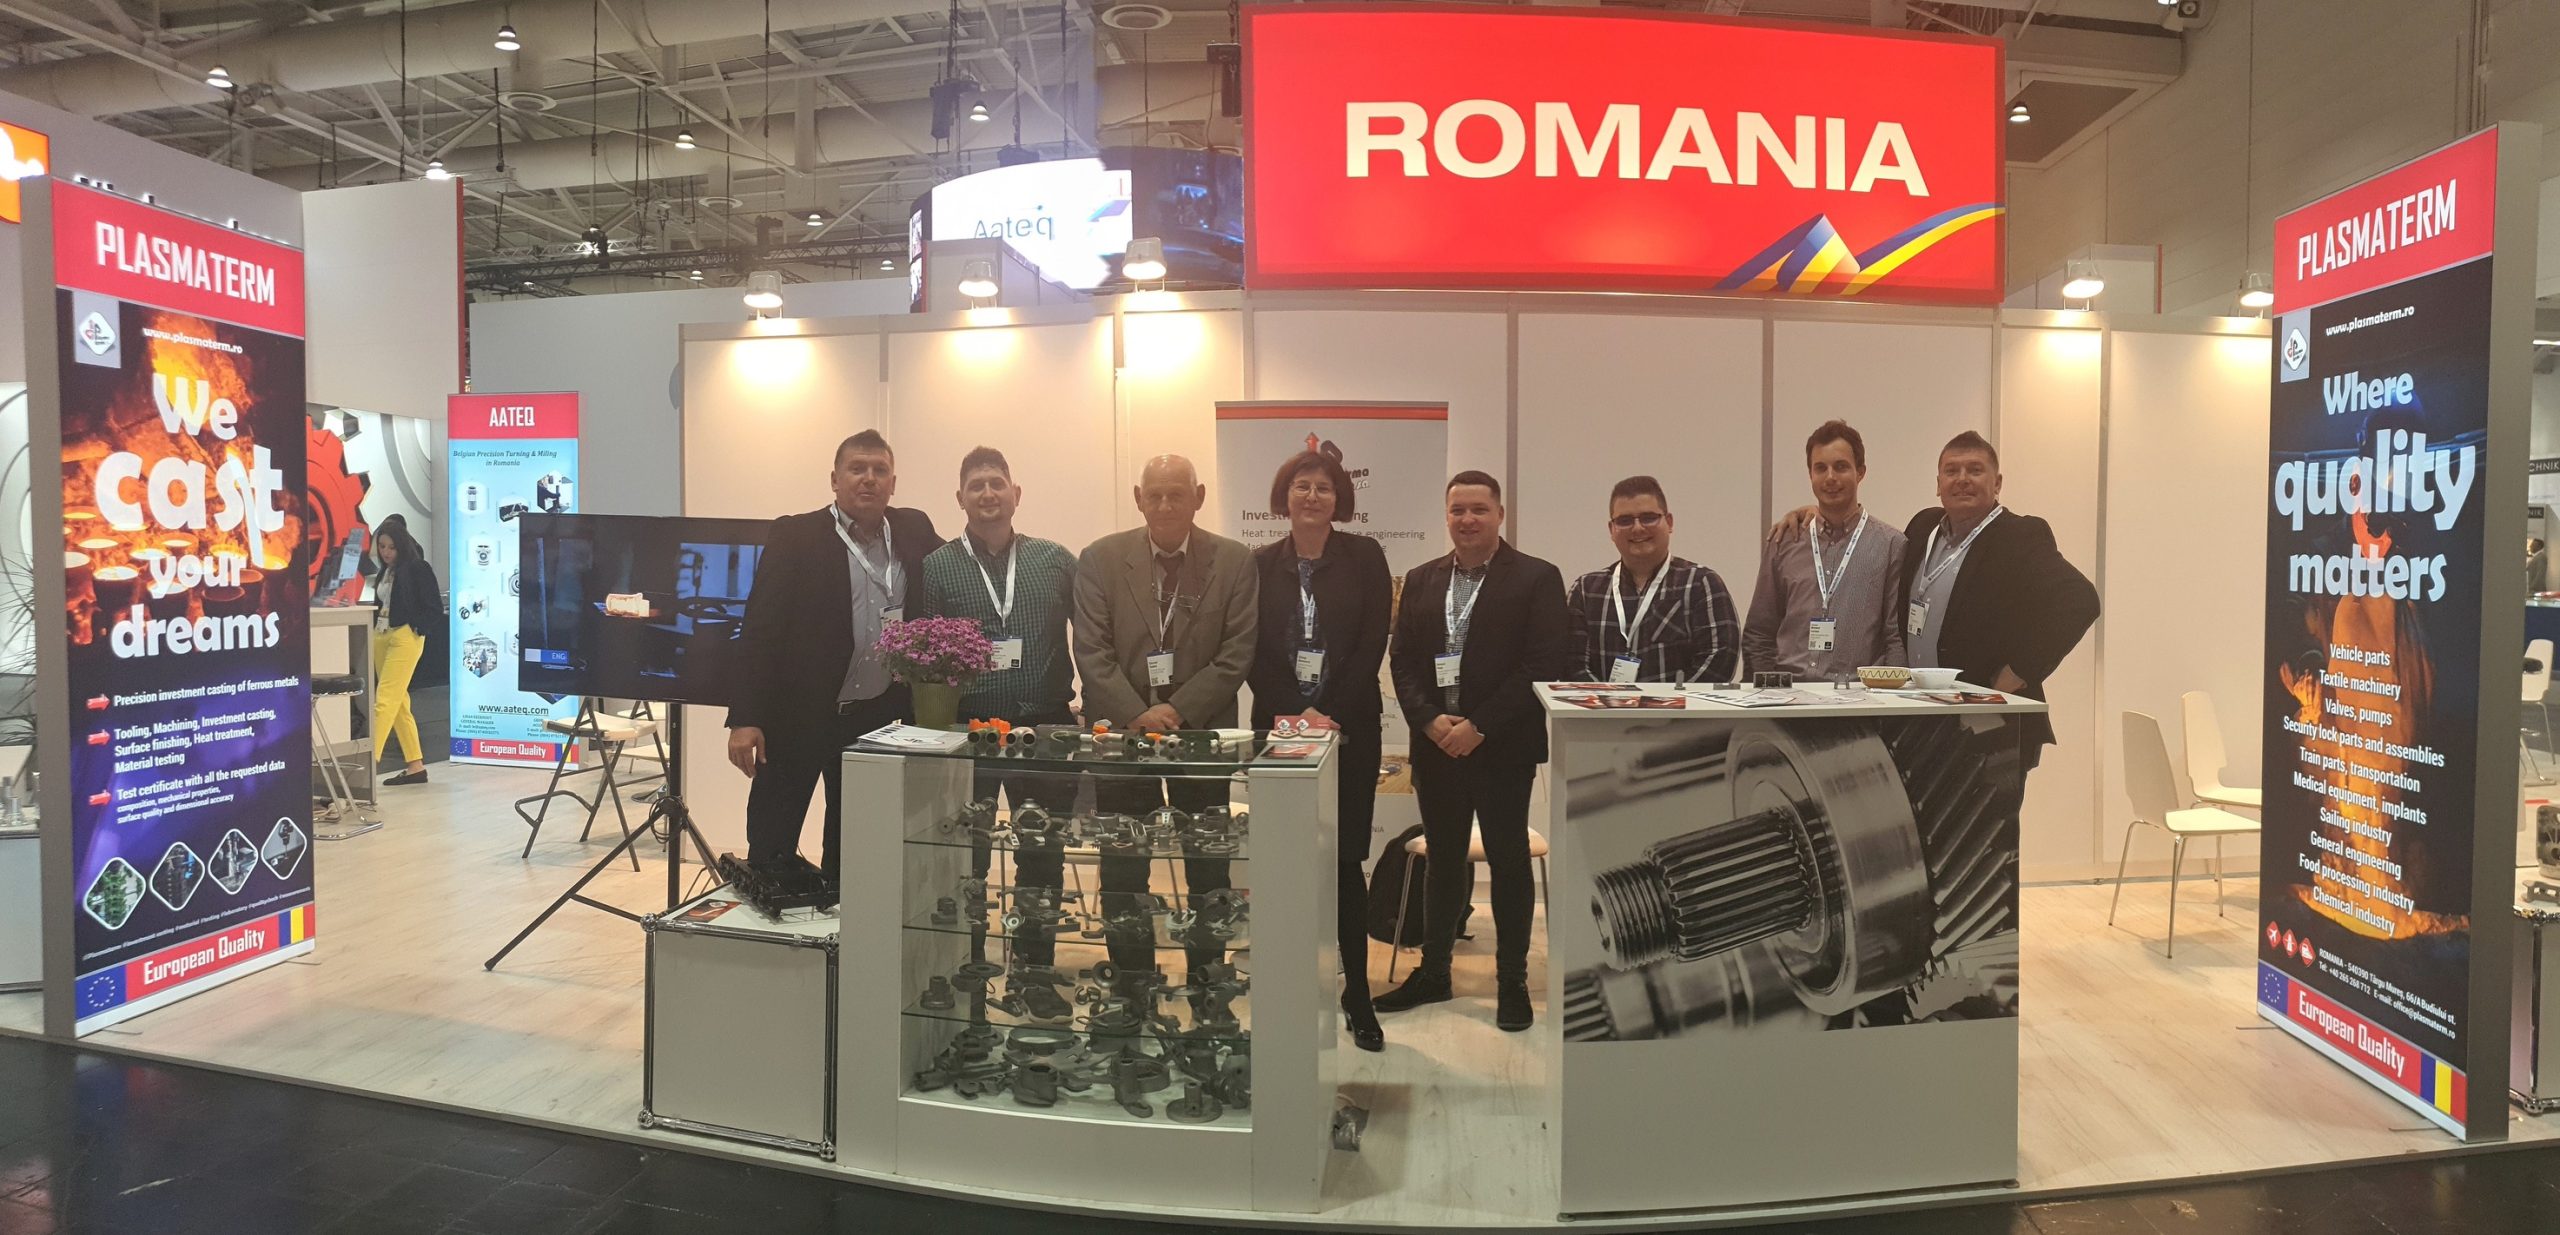 Our team at Hannover-Messe